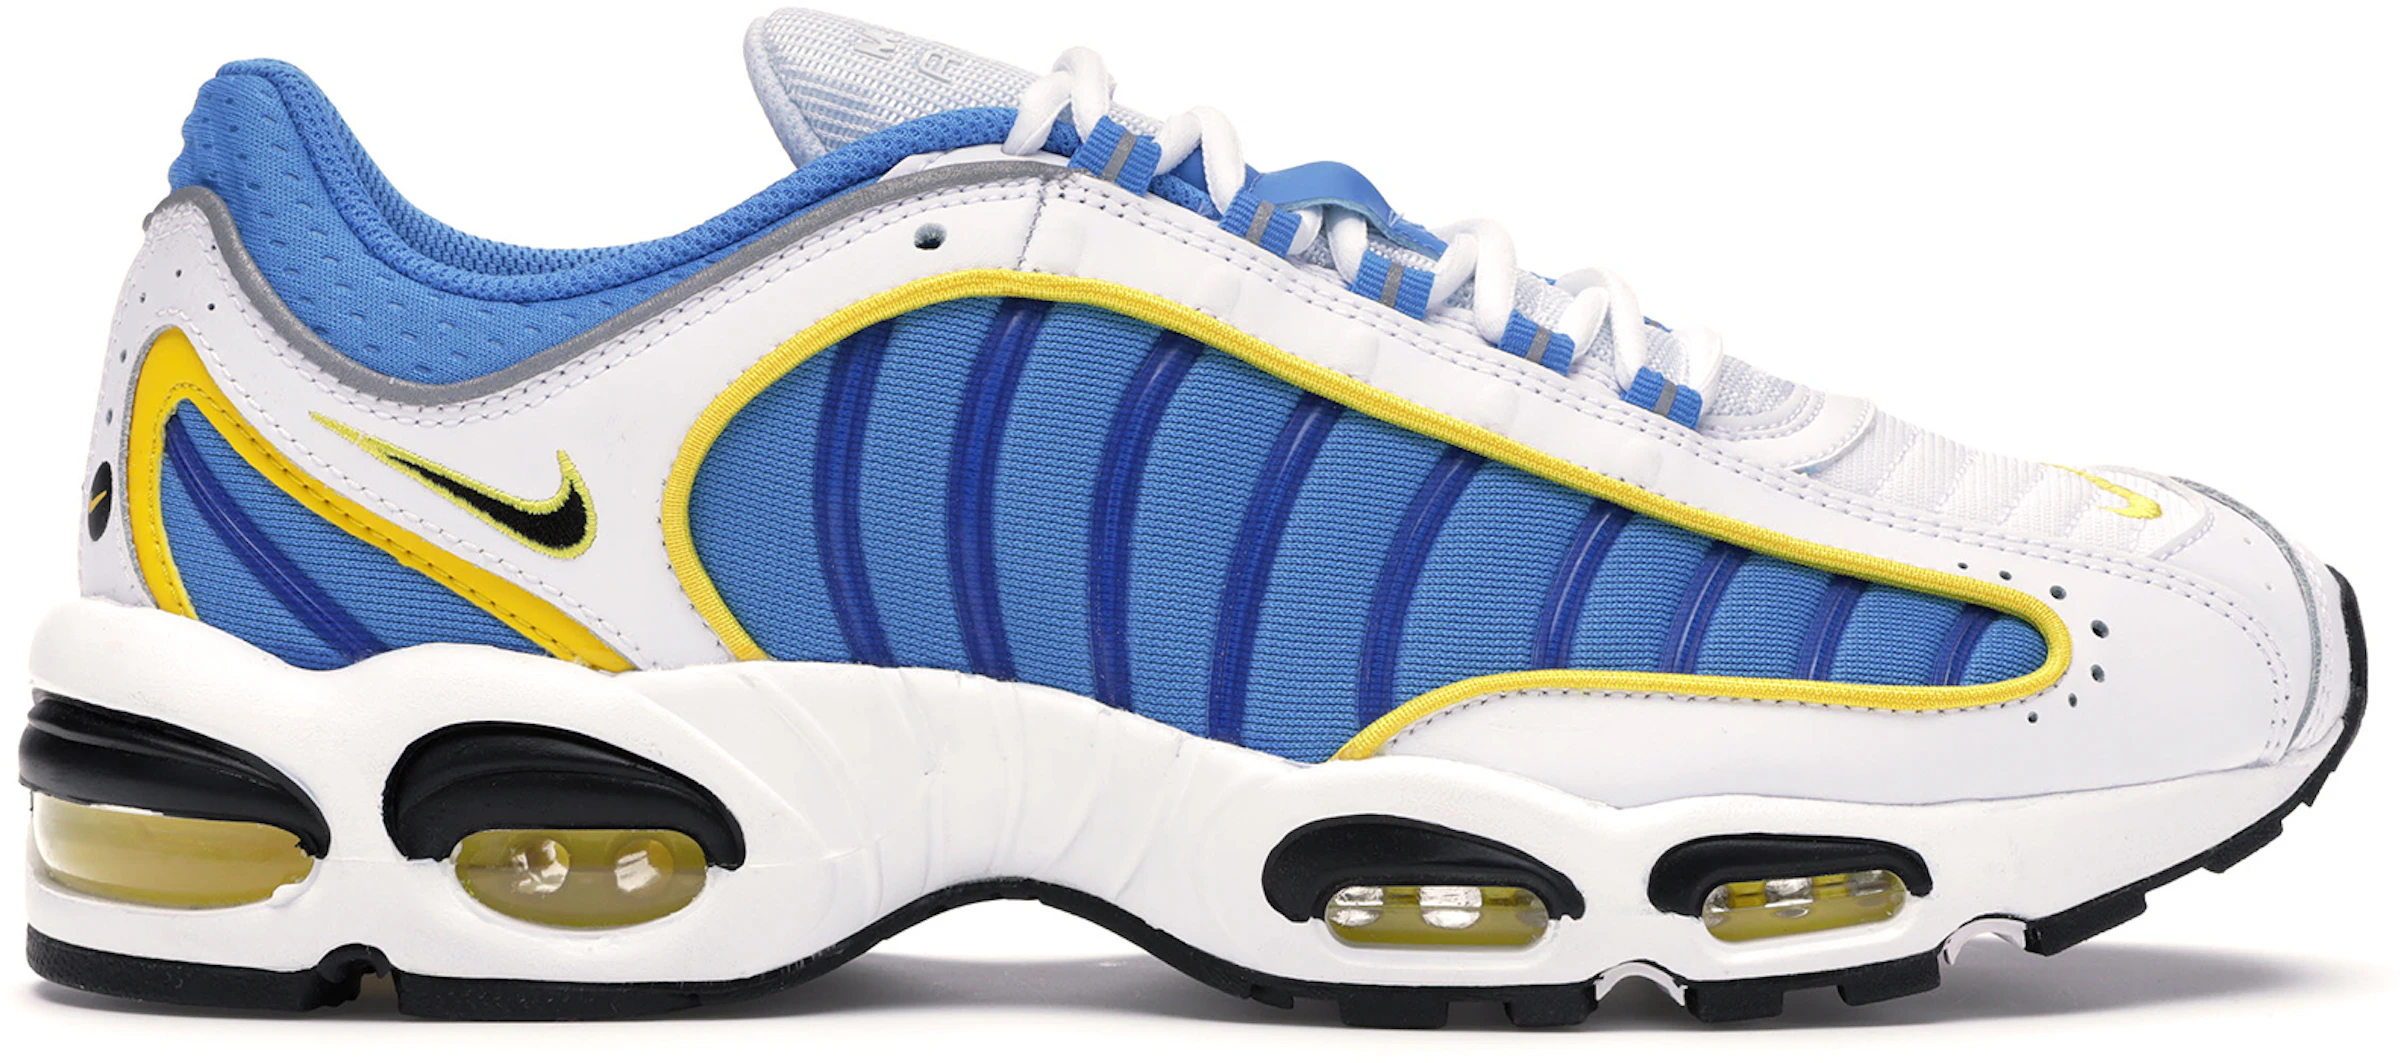 Air Max Tailwind White Yellow - CD0456-100 - US